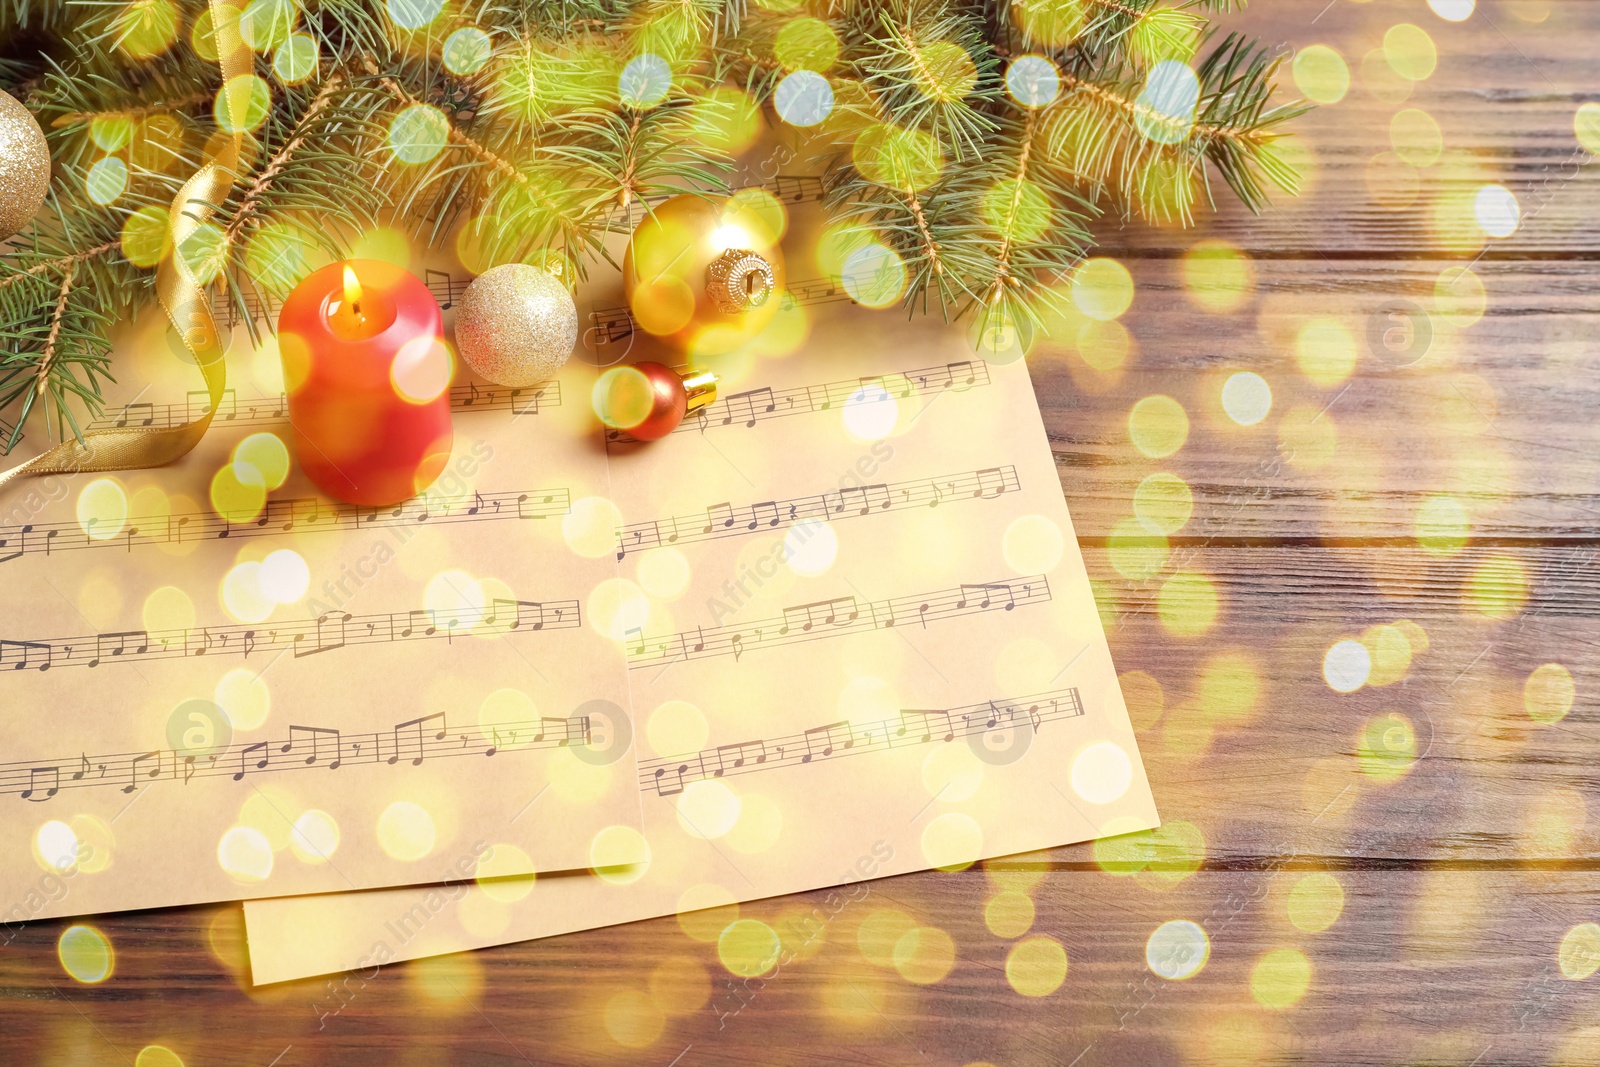 Image of Christmas and New Year music. Fir tree branch, festive decor and music sheets on wooden background, bokeh effect